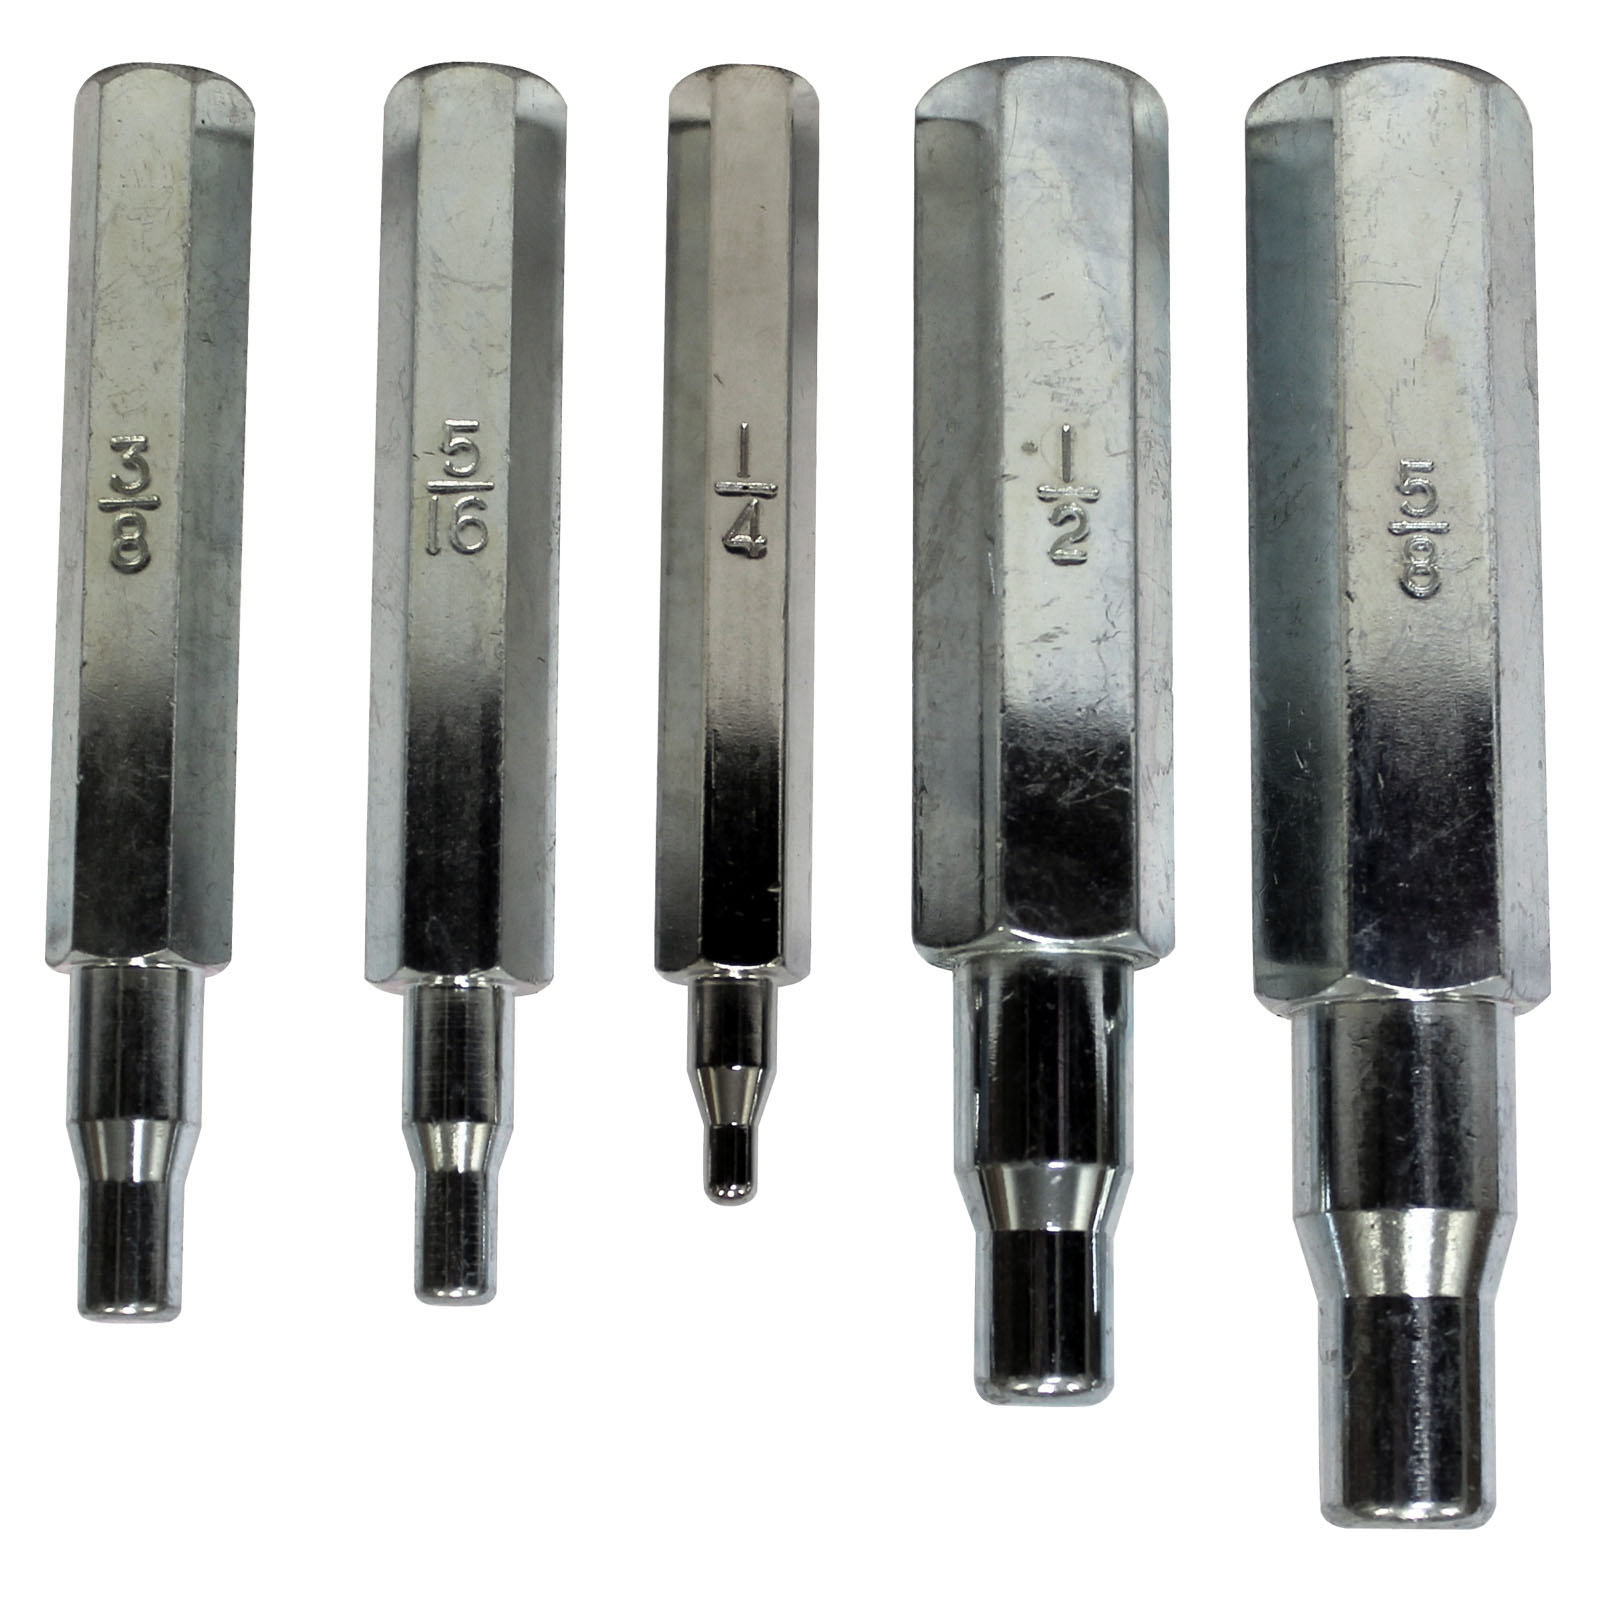 SET OF 5 SWAGING PUNCHES